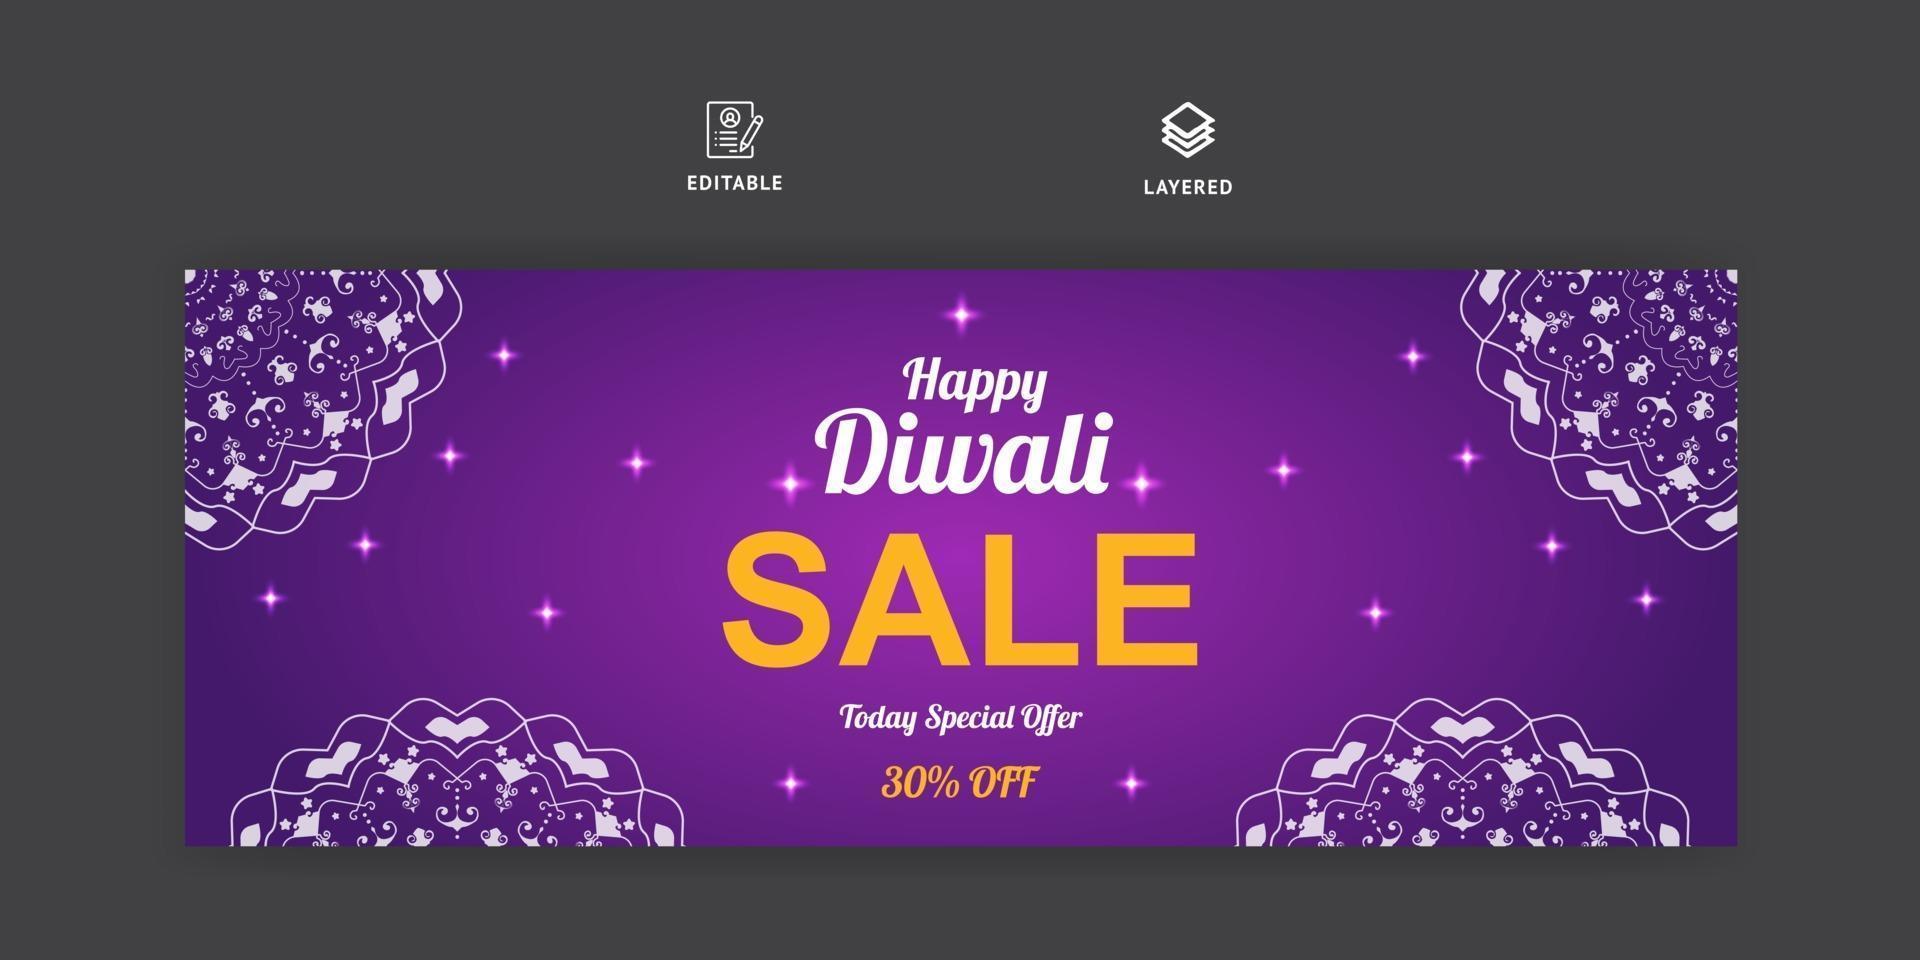 Diwali sale social media banner and facebook cover template vector